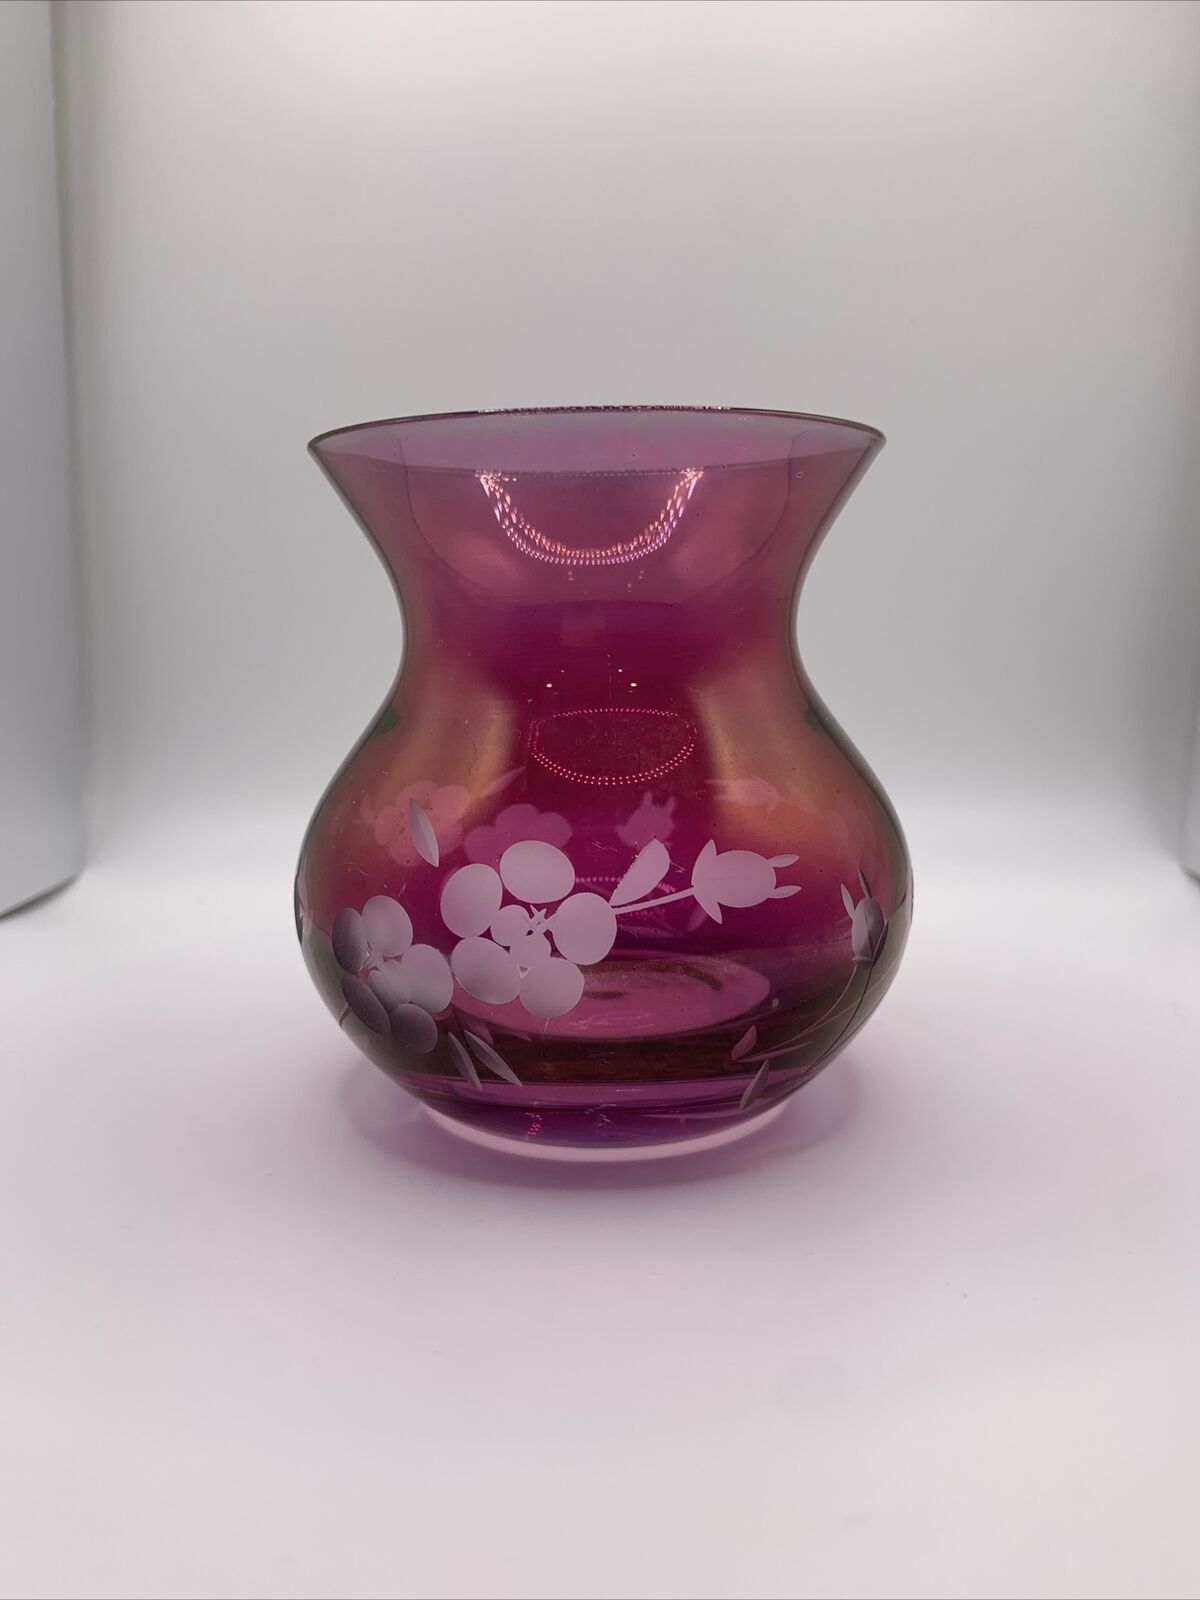 VINTAGE CRANBERRY/ PINK ETCHED GLASS BUD VASE APPROX 3 1/2” TALL ~Scratches